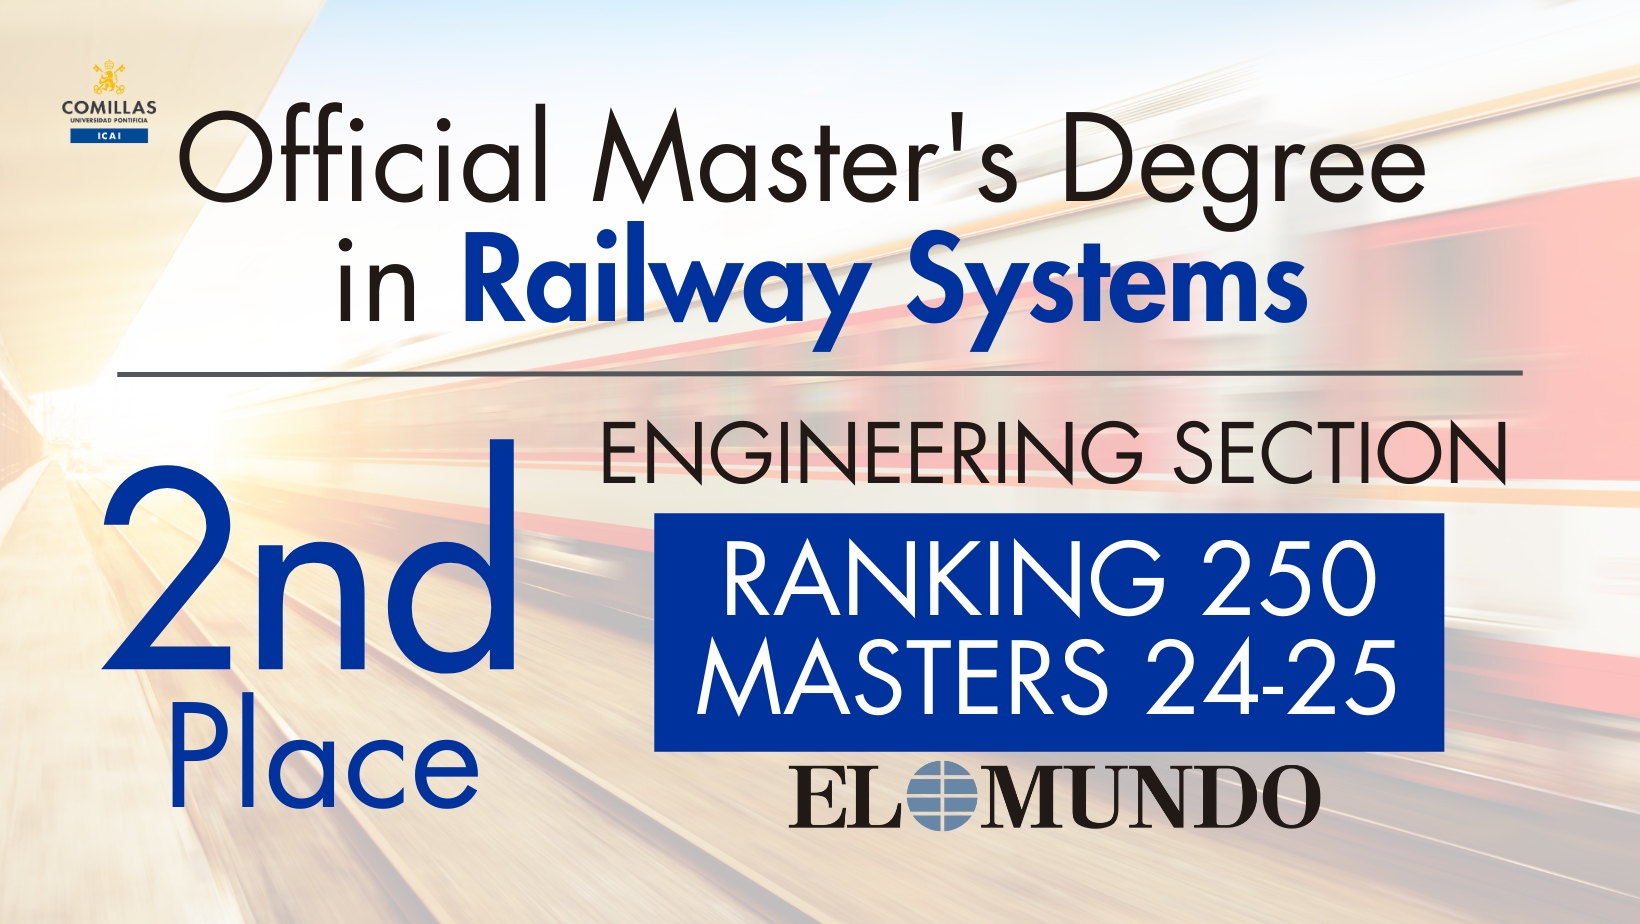 Advertisement for the Official Master's Degree in Railway Systems at Comillas showing its 2nd place ranking in the Engineering section by EL MUNDO for 24-25.